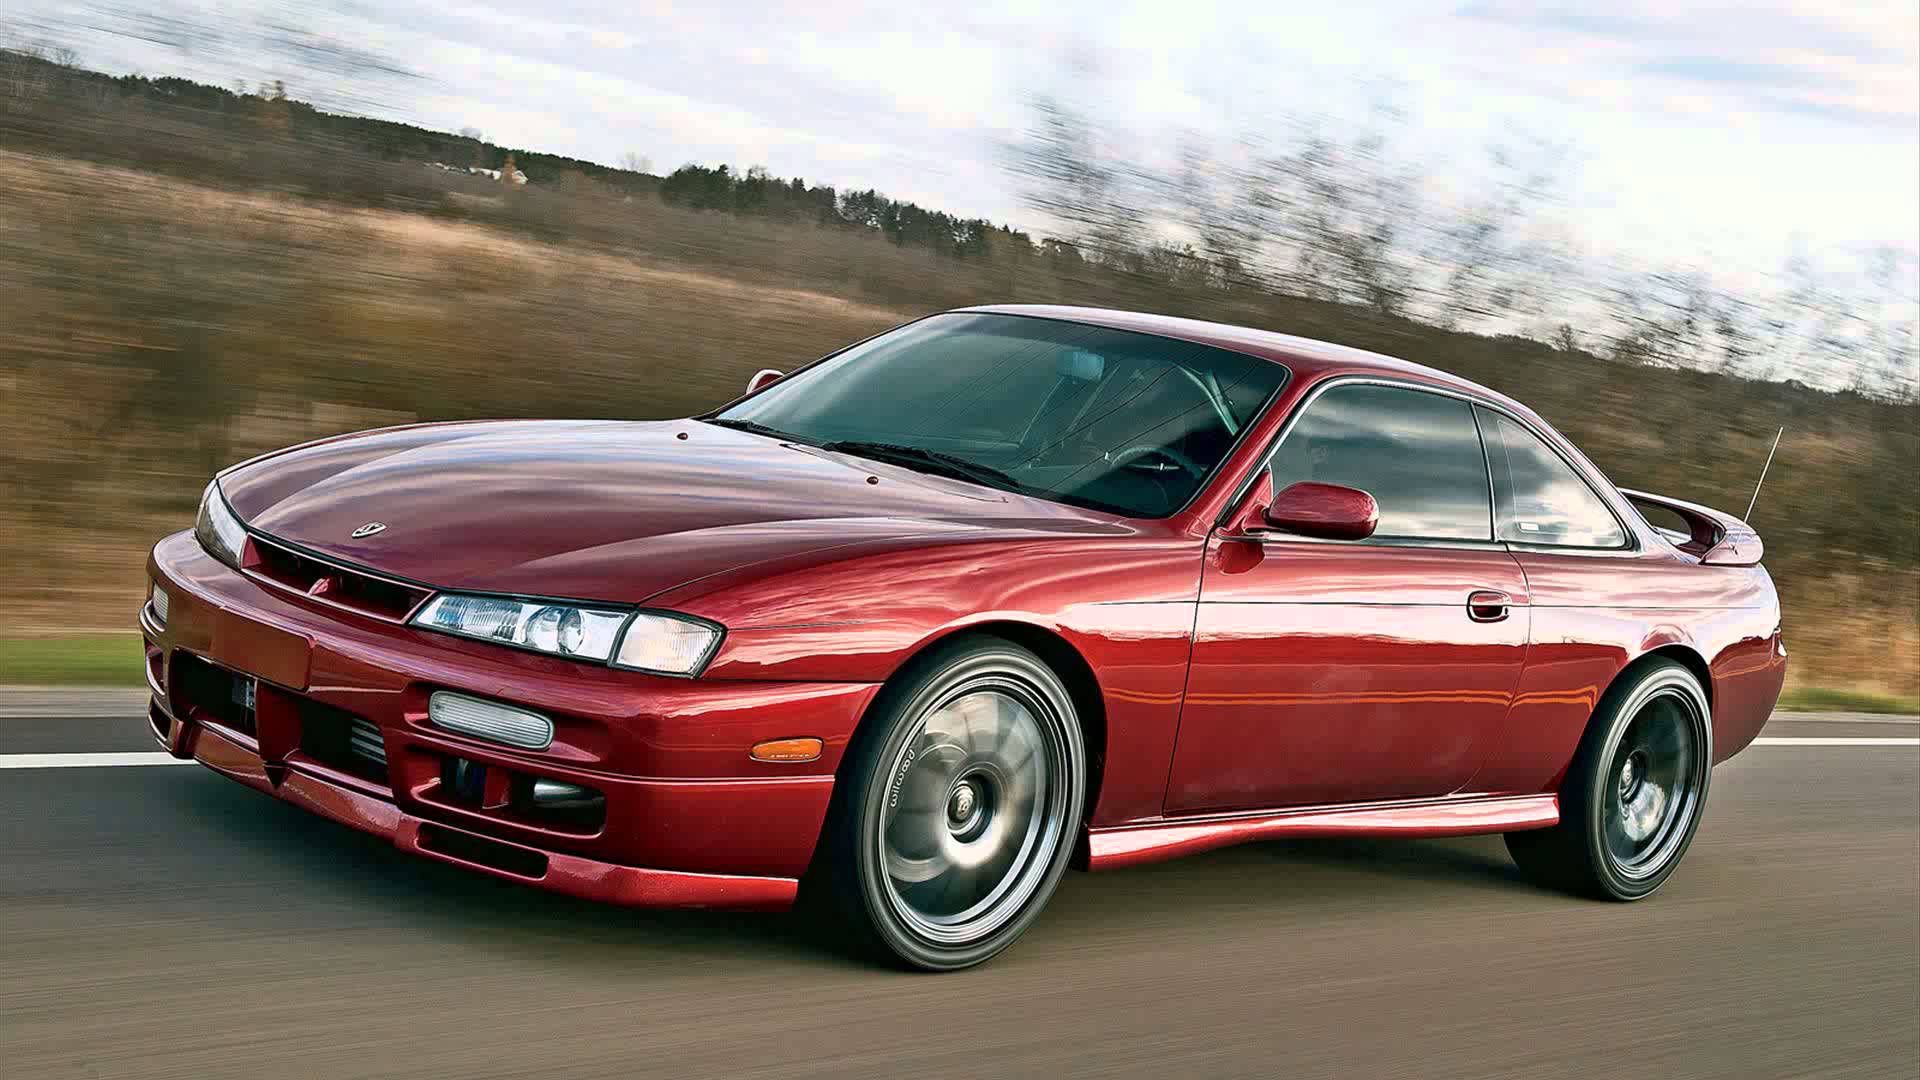 Nissan 240SX on the highway